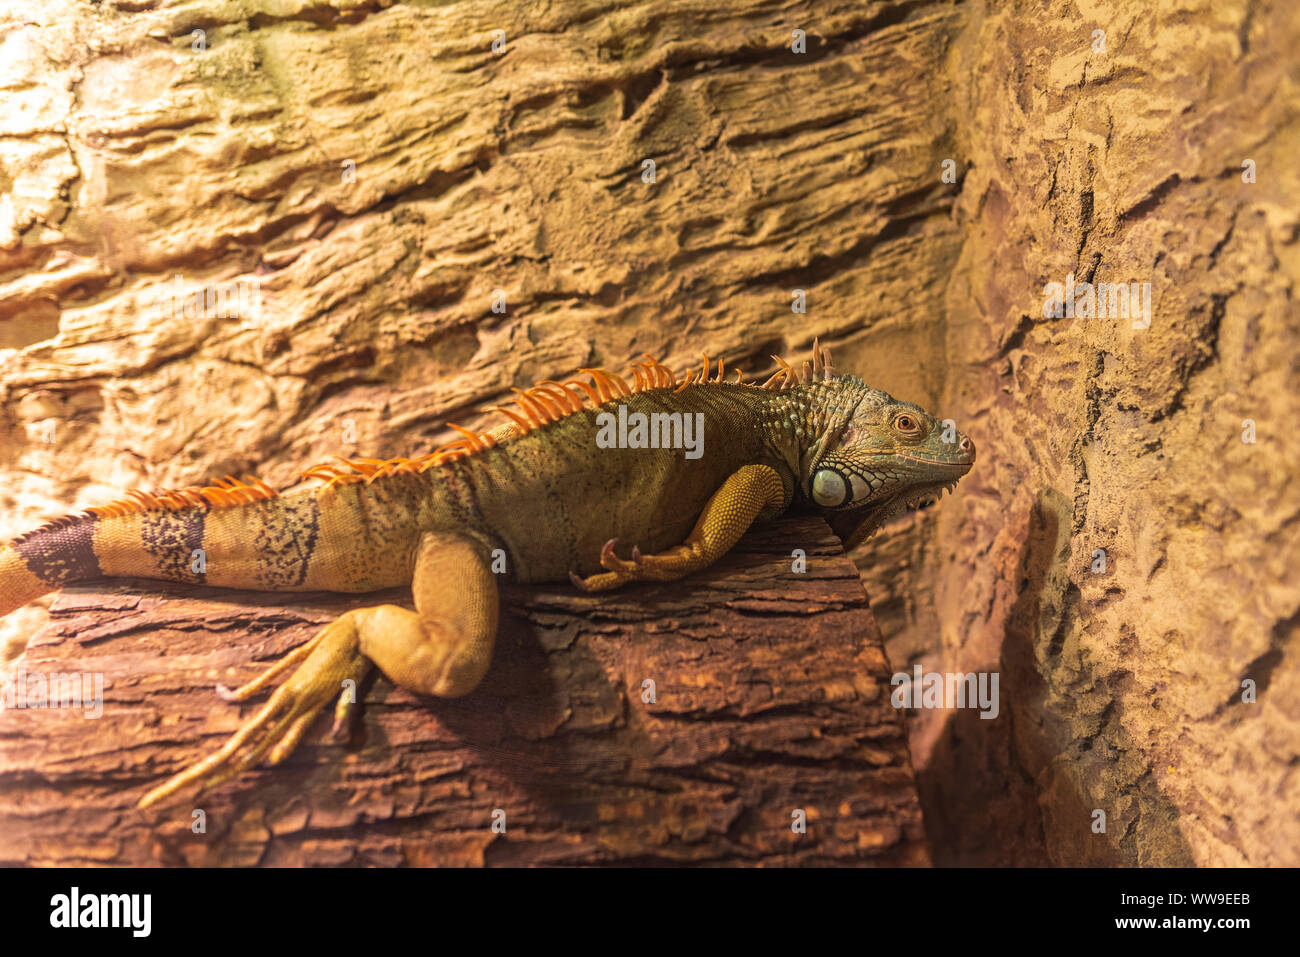 Close up photo of a Central American green iguana. Stock Photo